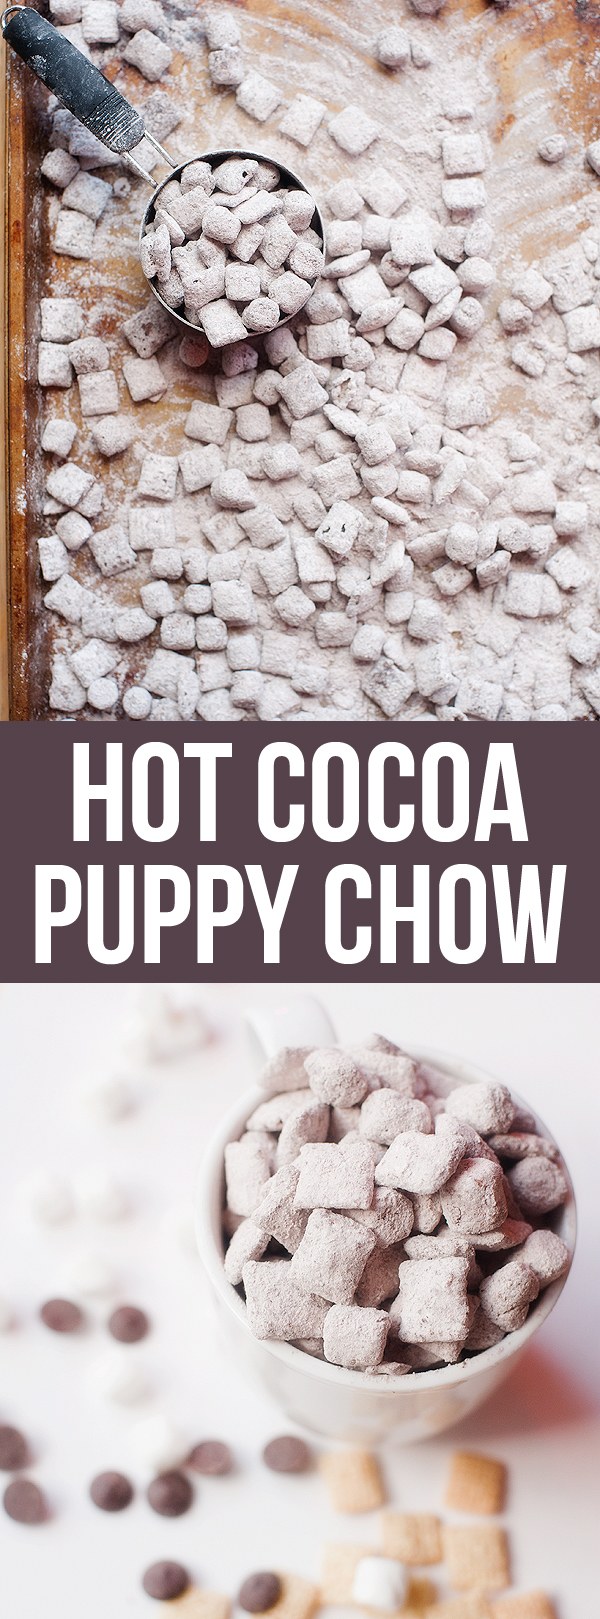 Hot Cocoa Puppy Chow